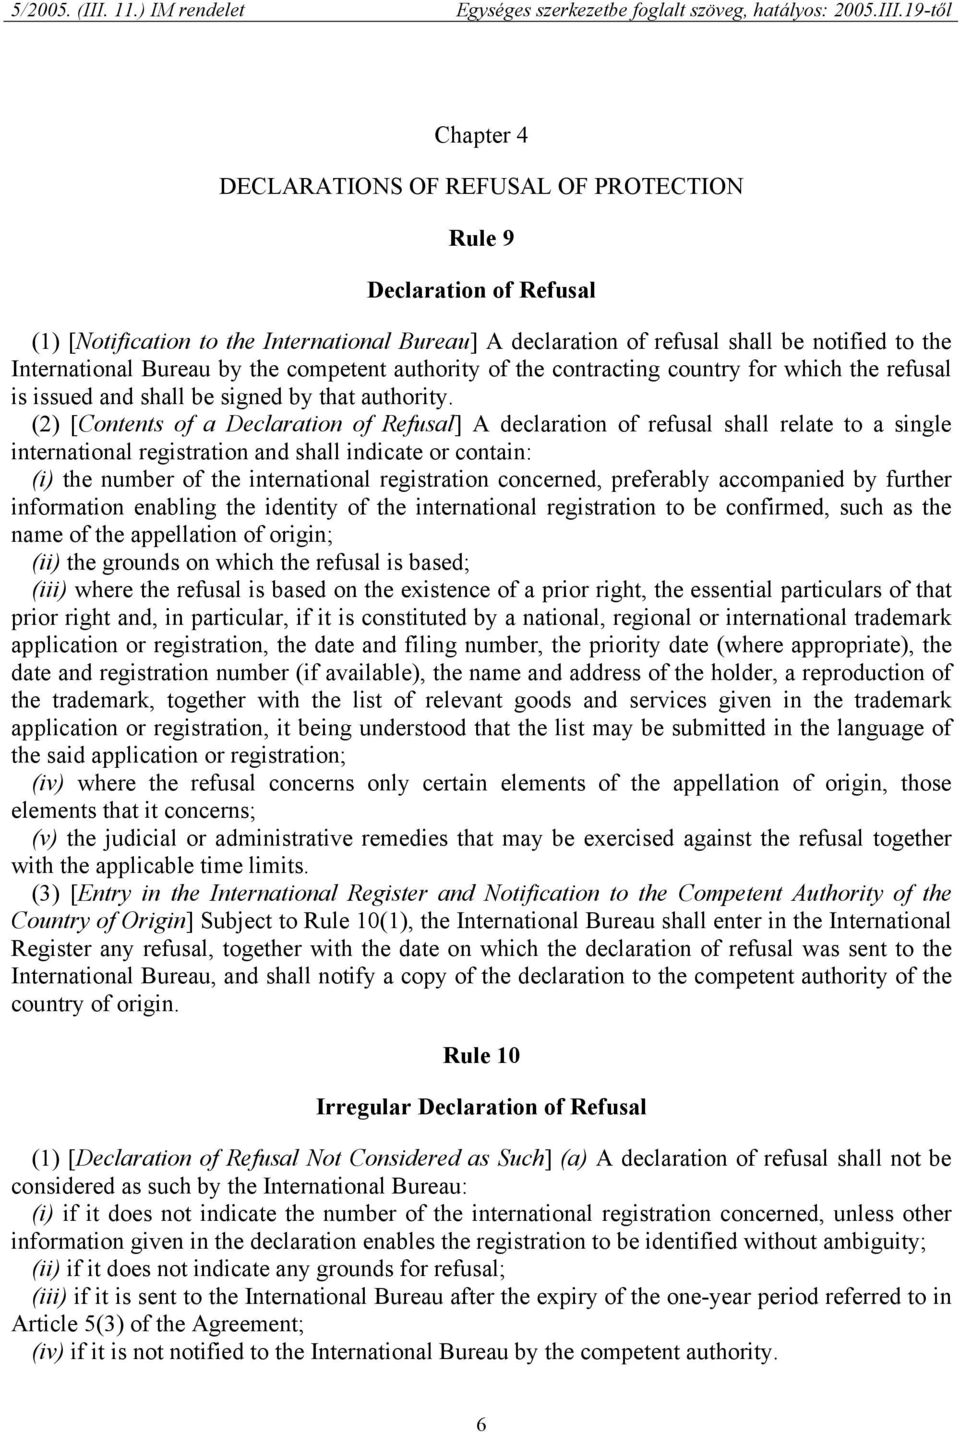 (2) [Contents of a Declaration of Refusal] A declaration of refusal shall relate to a single international registration and shall indicate or contain: (i) the number of the international registration